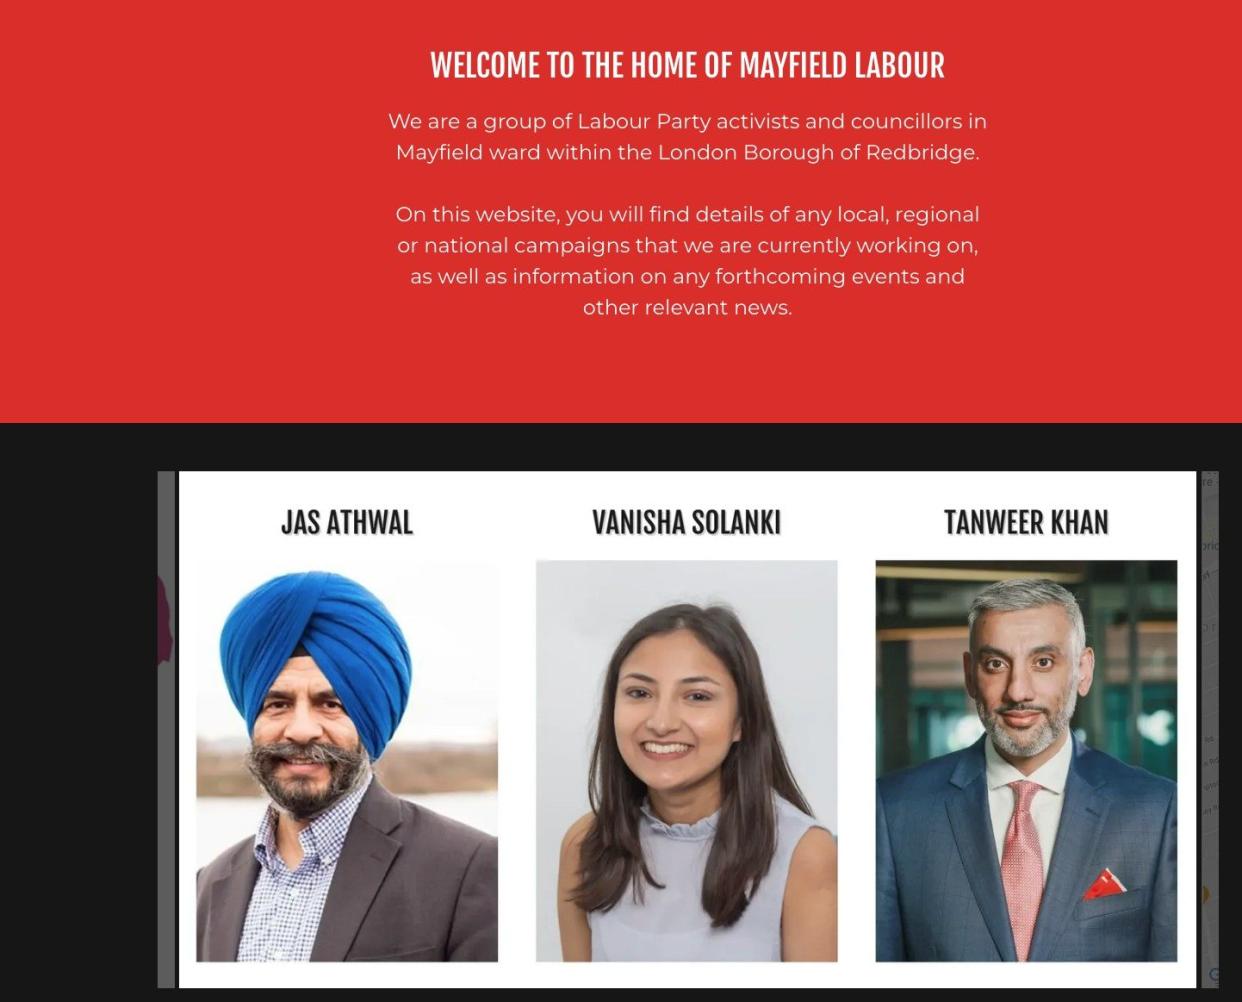 Mayfield Labour Party website including a picture of Tanweer Khan